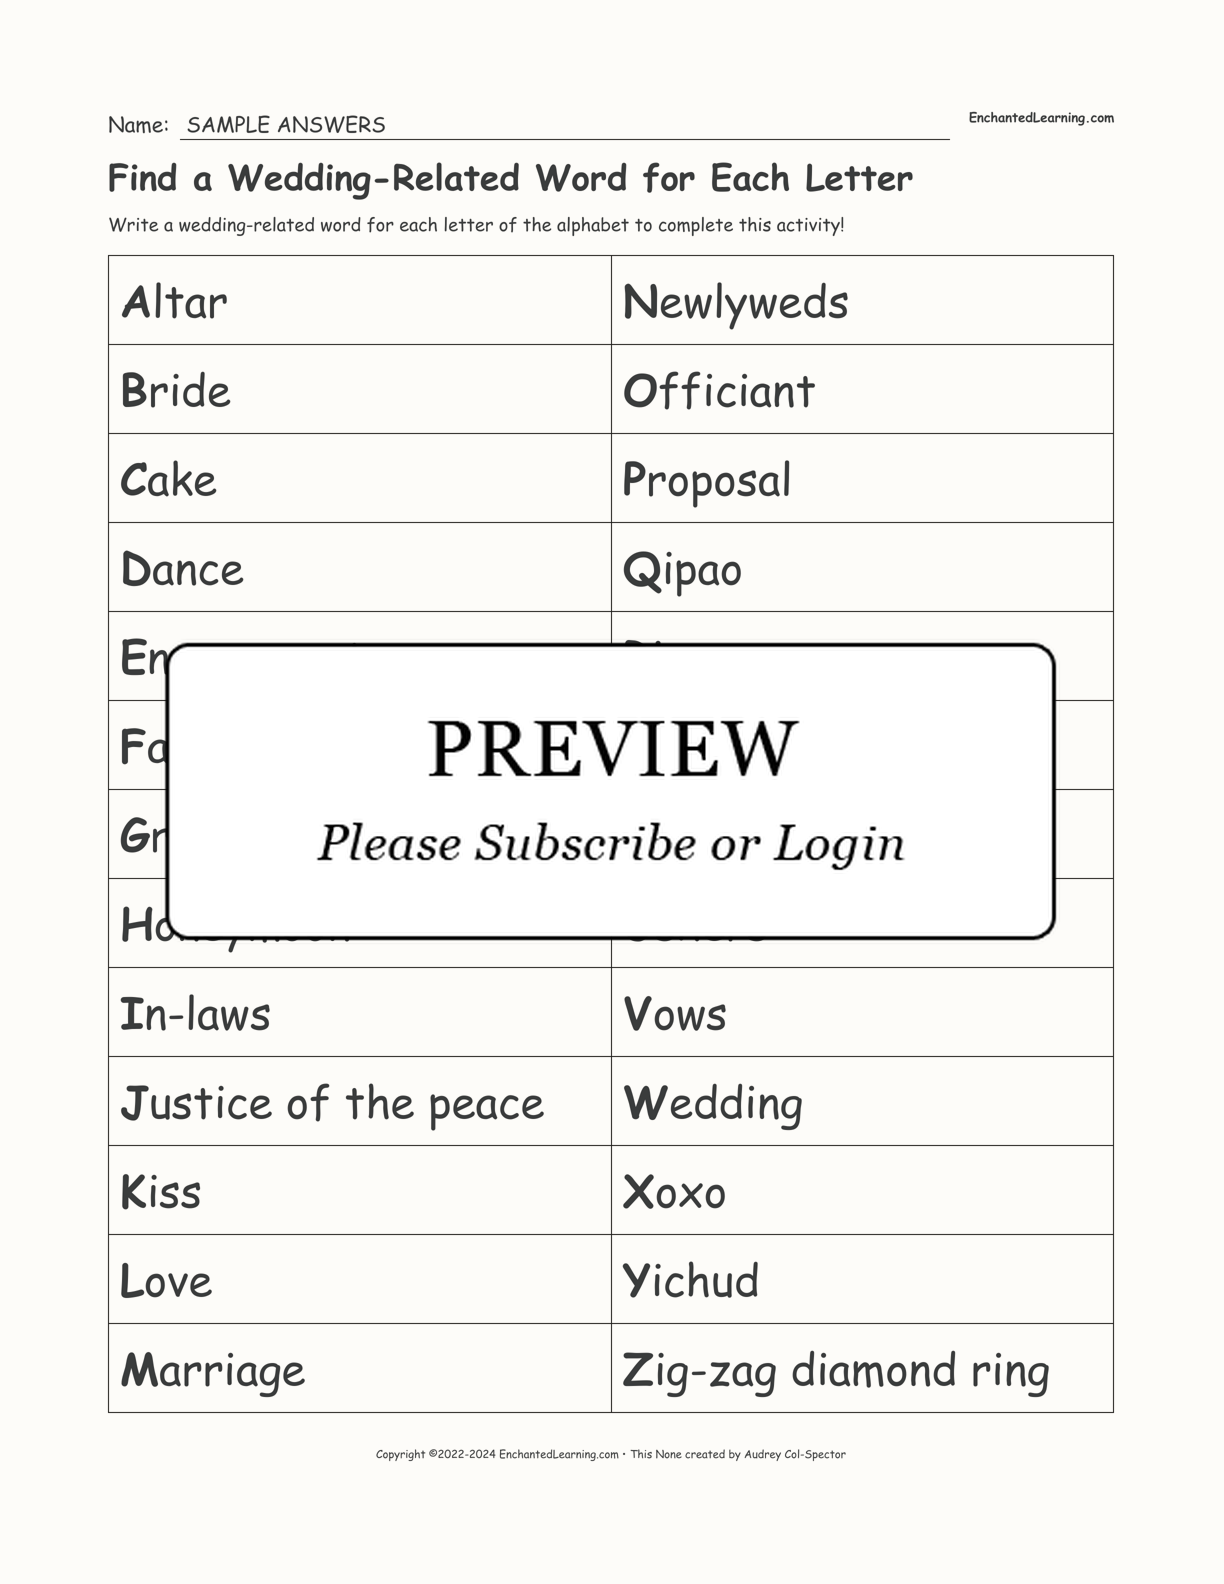 Find a Wedding-Related Word for Each Letter interactive worksheet page 2